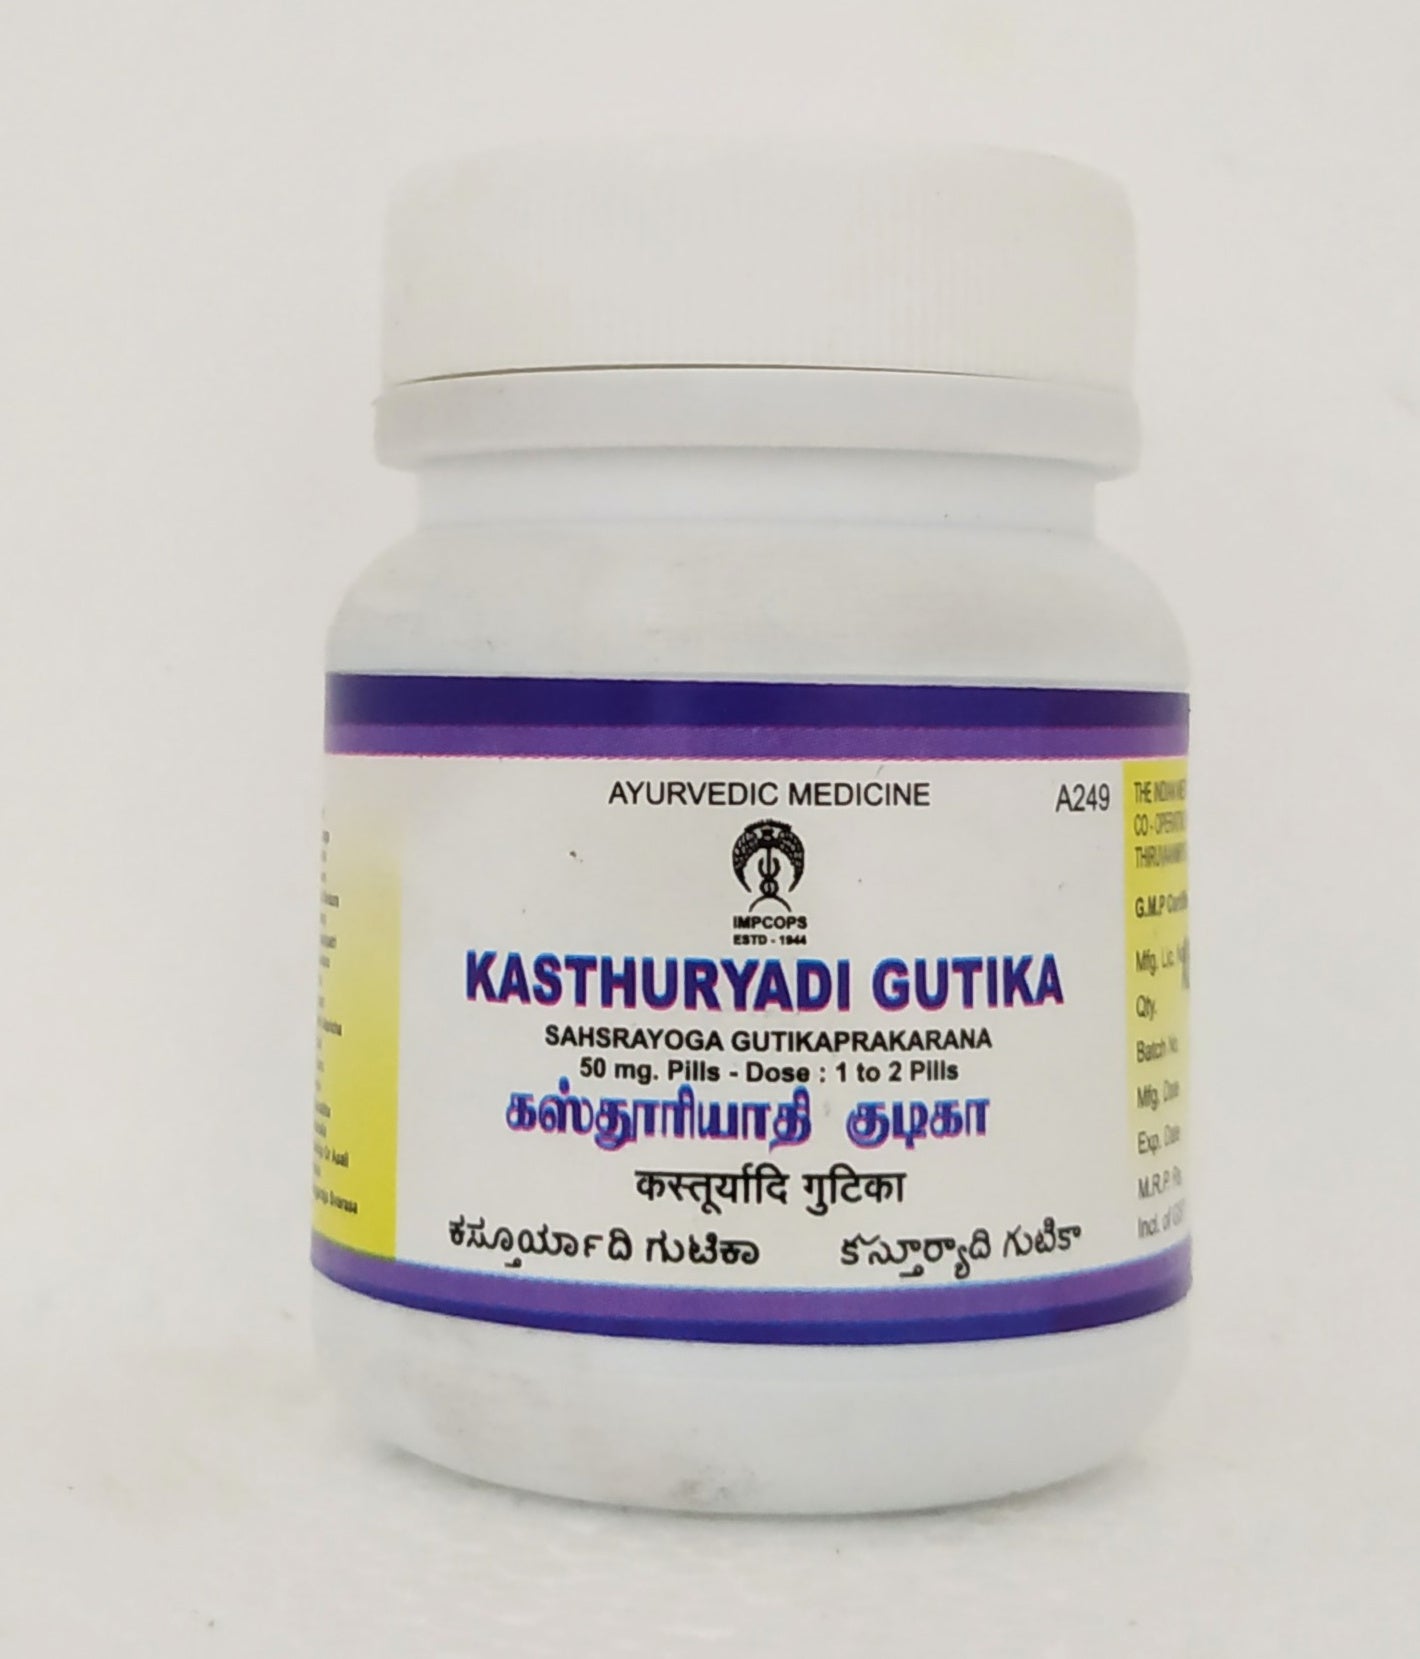 Shop Kasthuryadi gutika tablets 50gm at price 456.00 from Impcops Online - Ayush Care